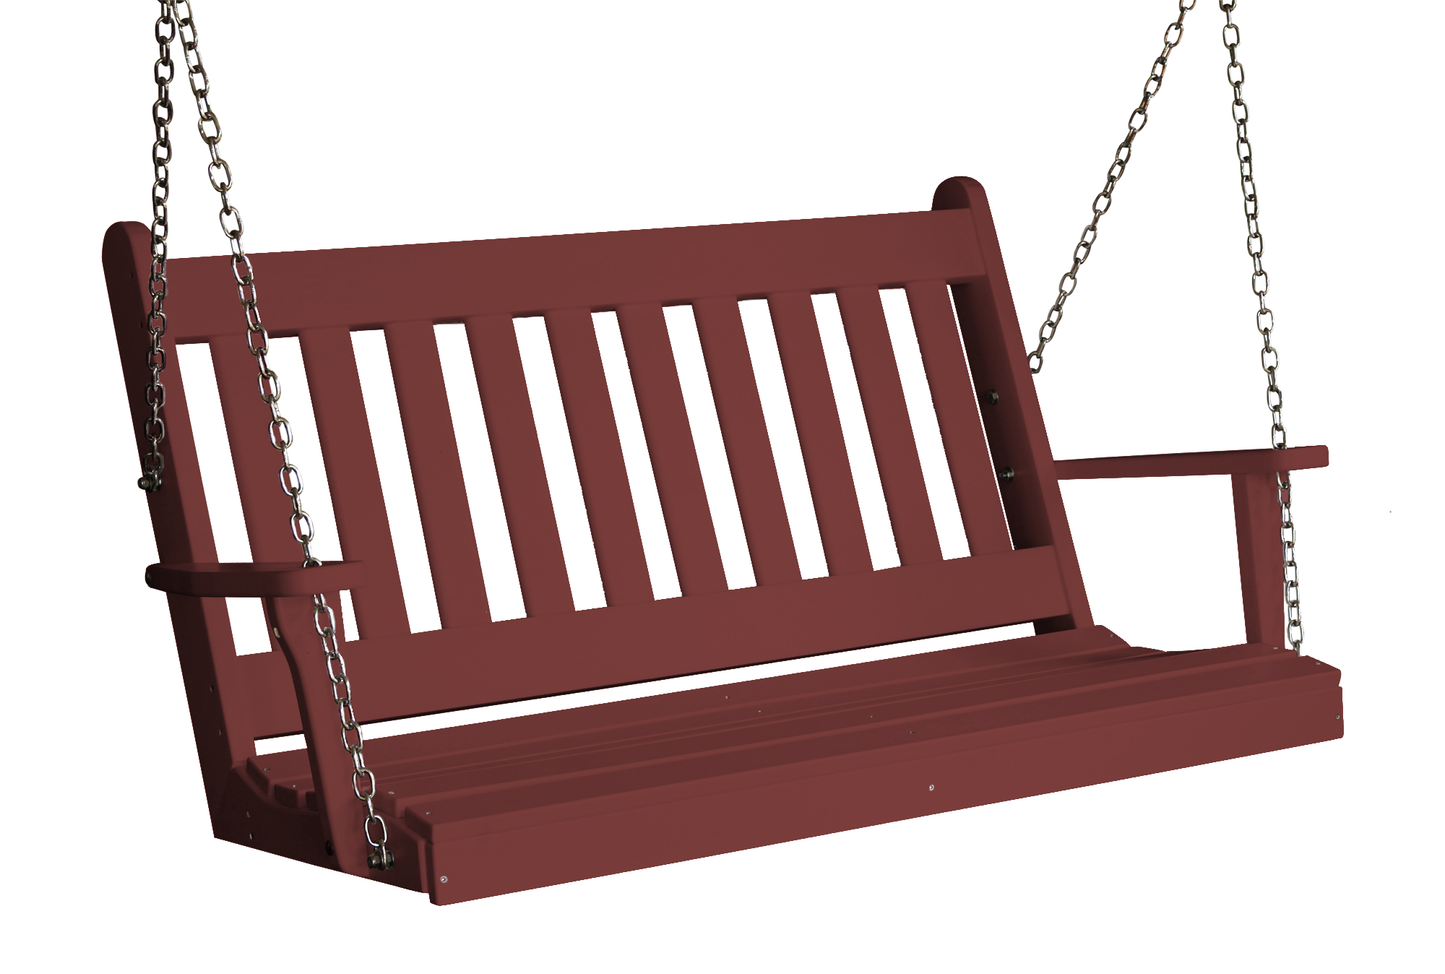 Traditional English Recycled Plastic Porch Swing